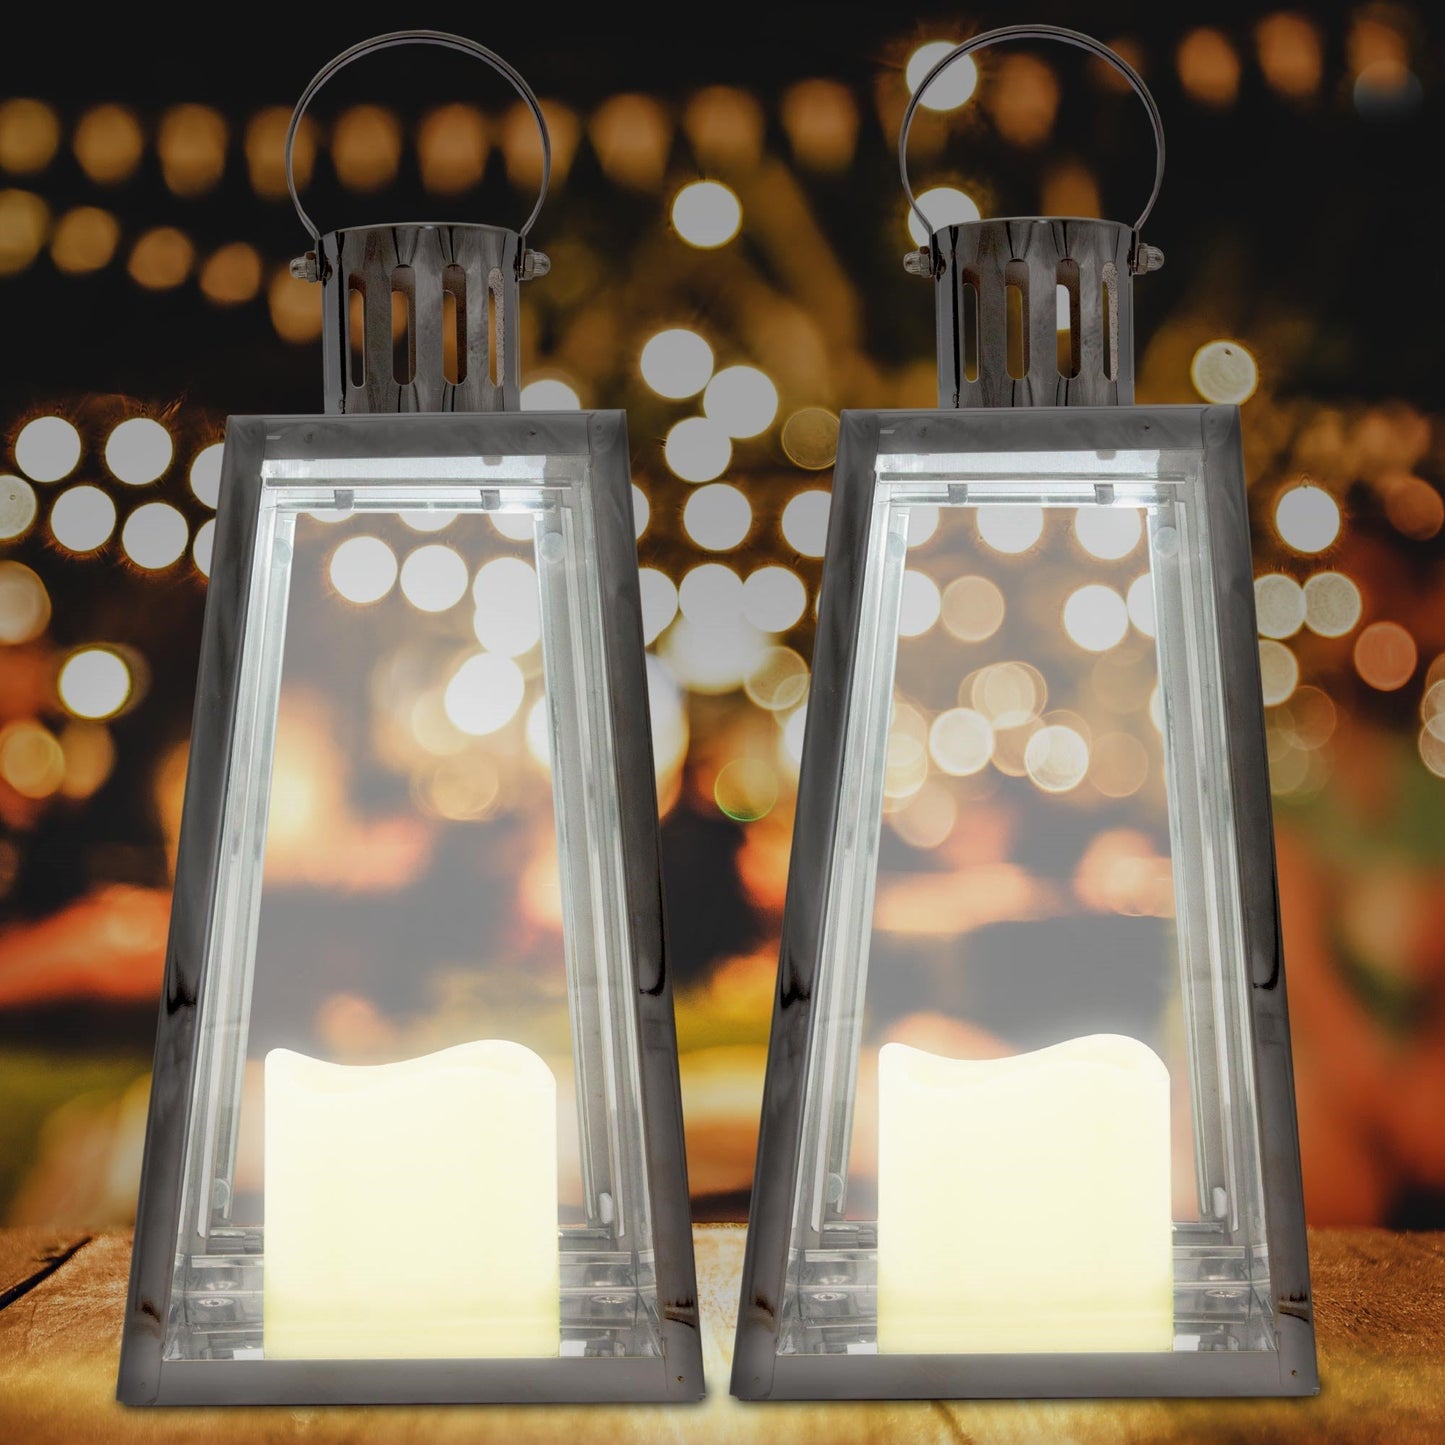 Lewis's Triangular Lanterns Candle Holders with Candles Set of 2 Large- 14.5x13.5x28.5cm